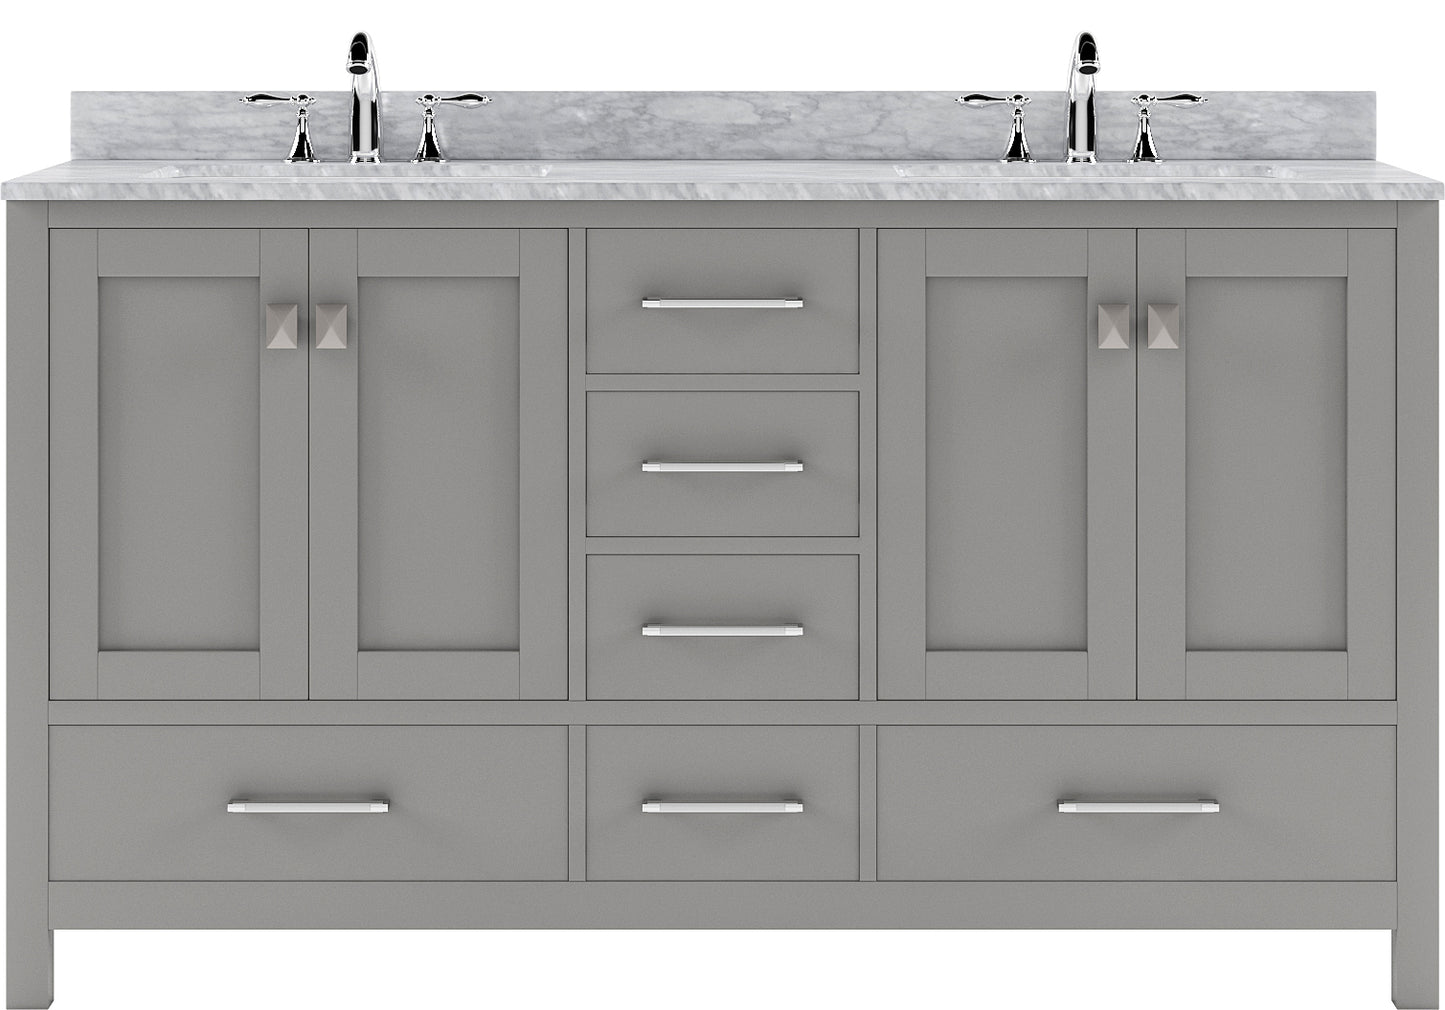 Virtu USA Caroline Avenue 60" Double Bath Vanity in Cashmere Grey with Marble Top and Square Sink with Brushed Nickel Faucet - Luxe Bathroom Vanities